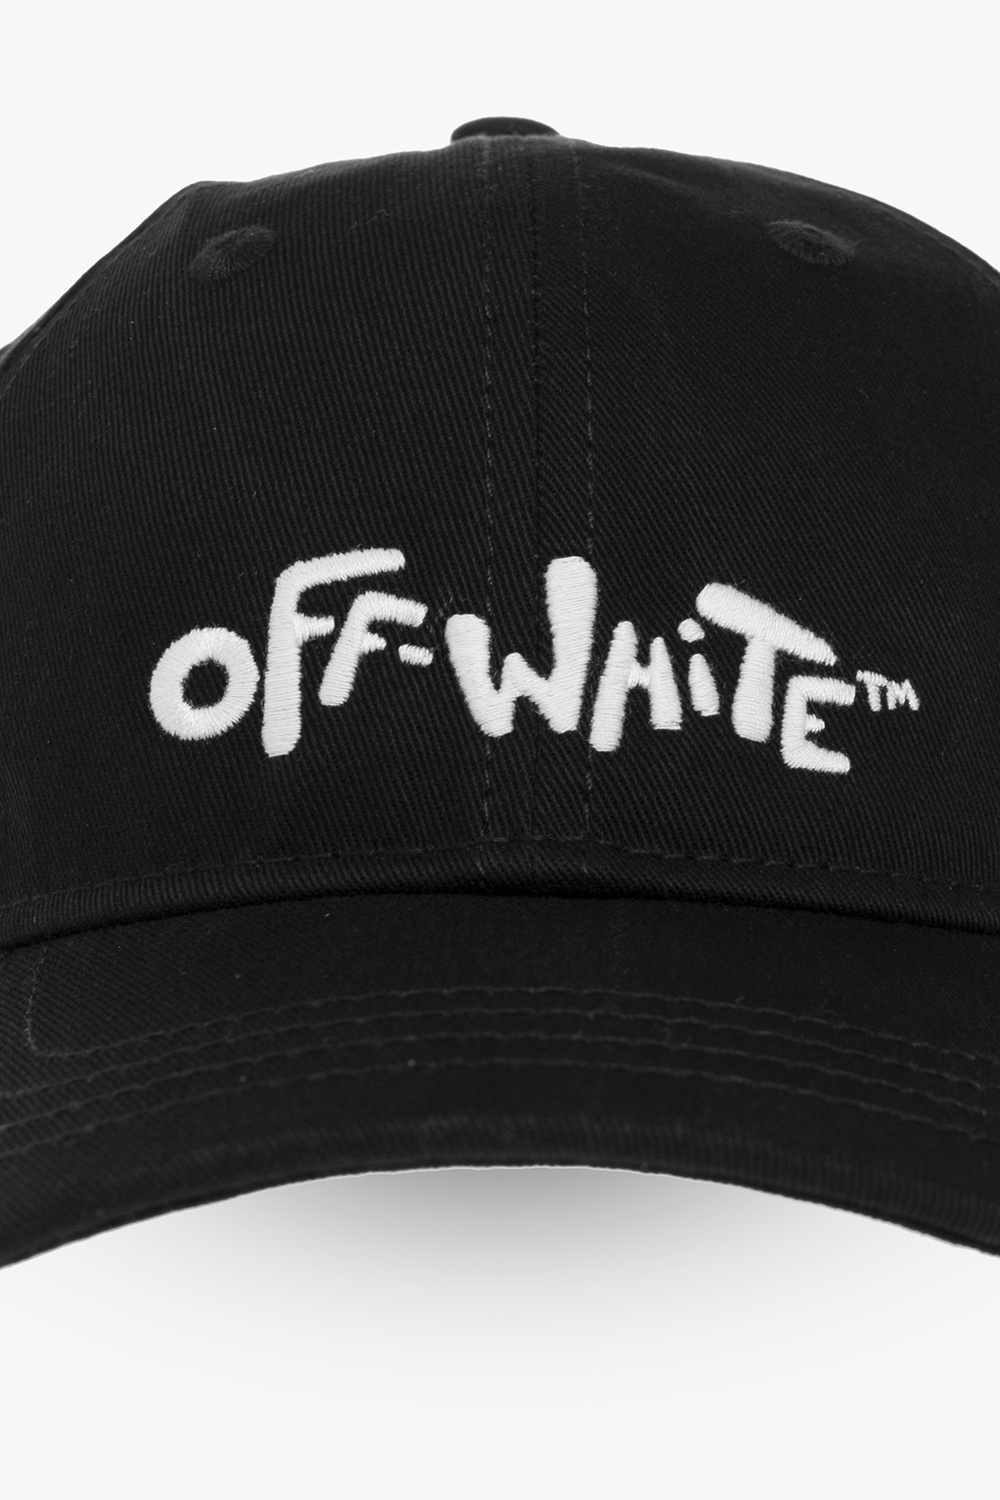 Off-White Kids storage wallets box accessories caps lighters